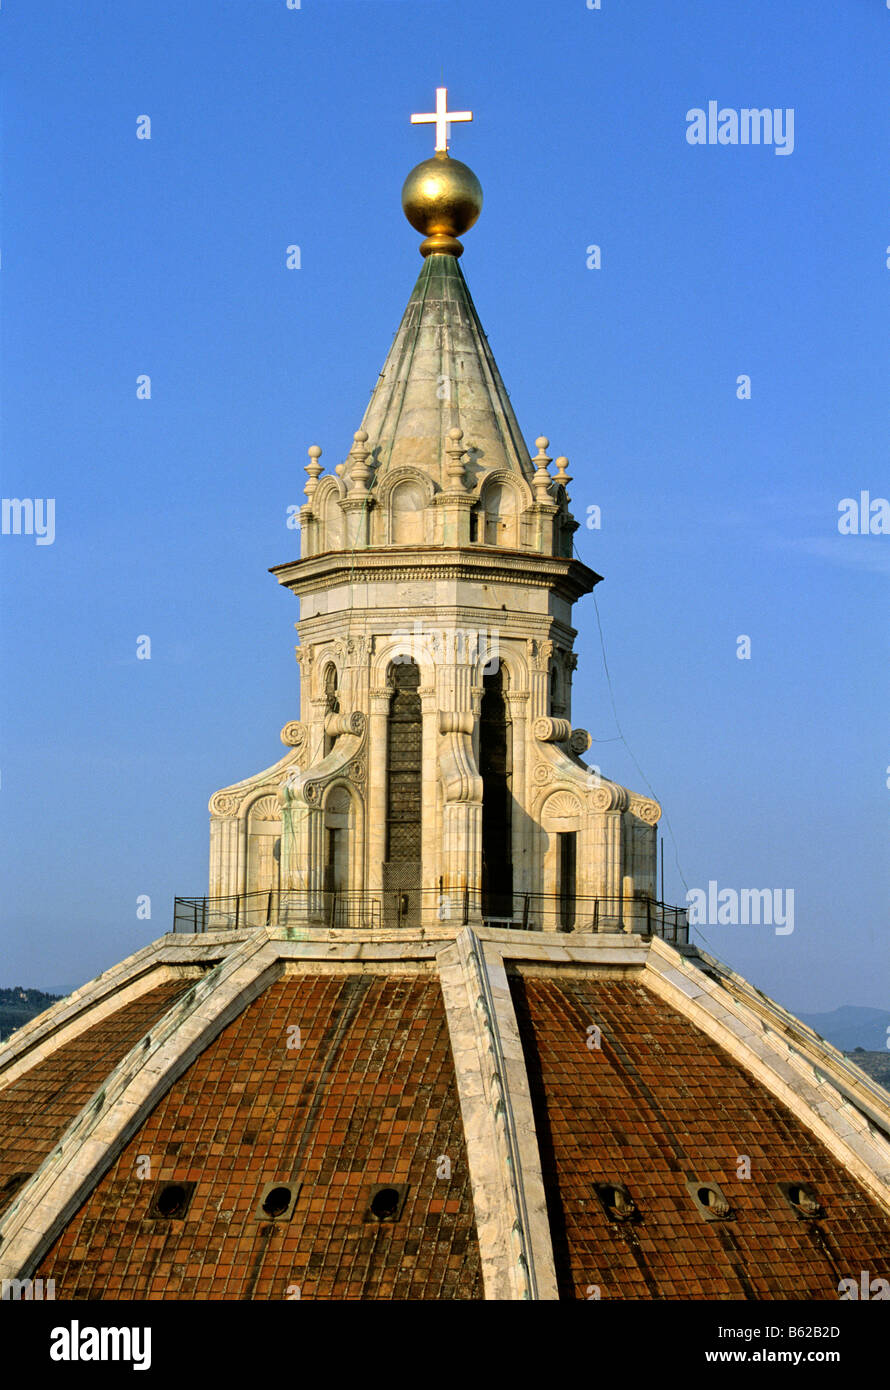 Lamp of the cupola of the Santa Maria del Fiore Cathedral, Florence, Tuscany, Italy Europe Stock Photo